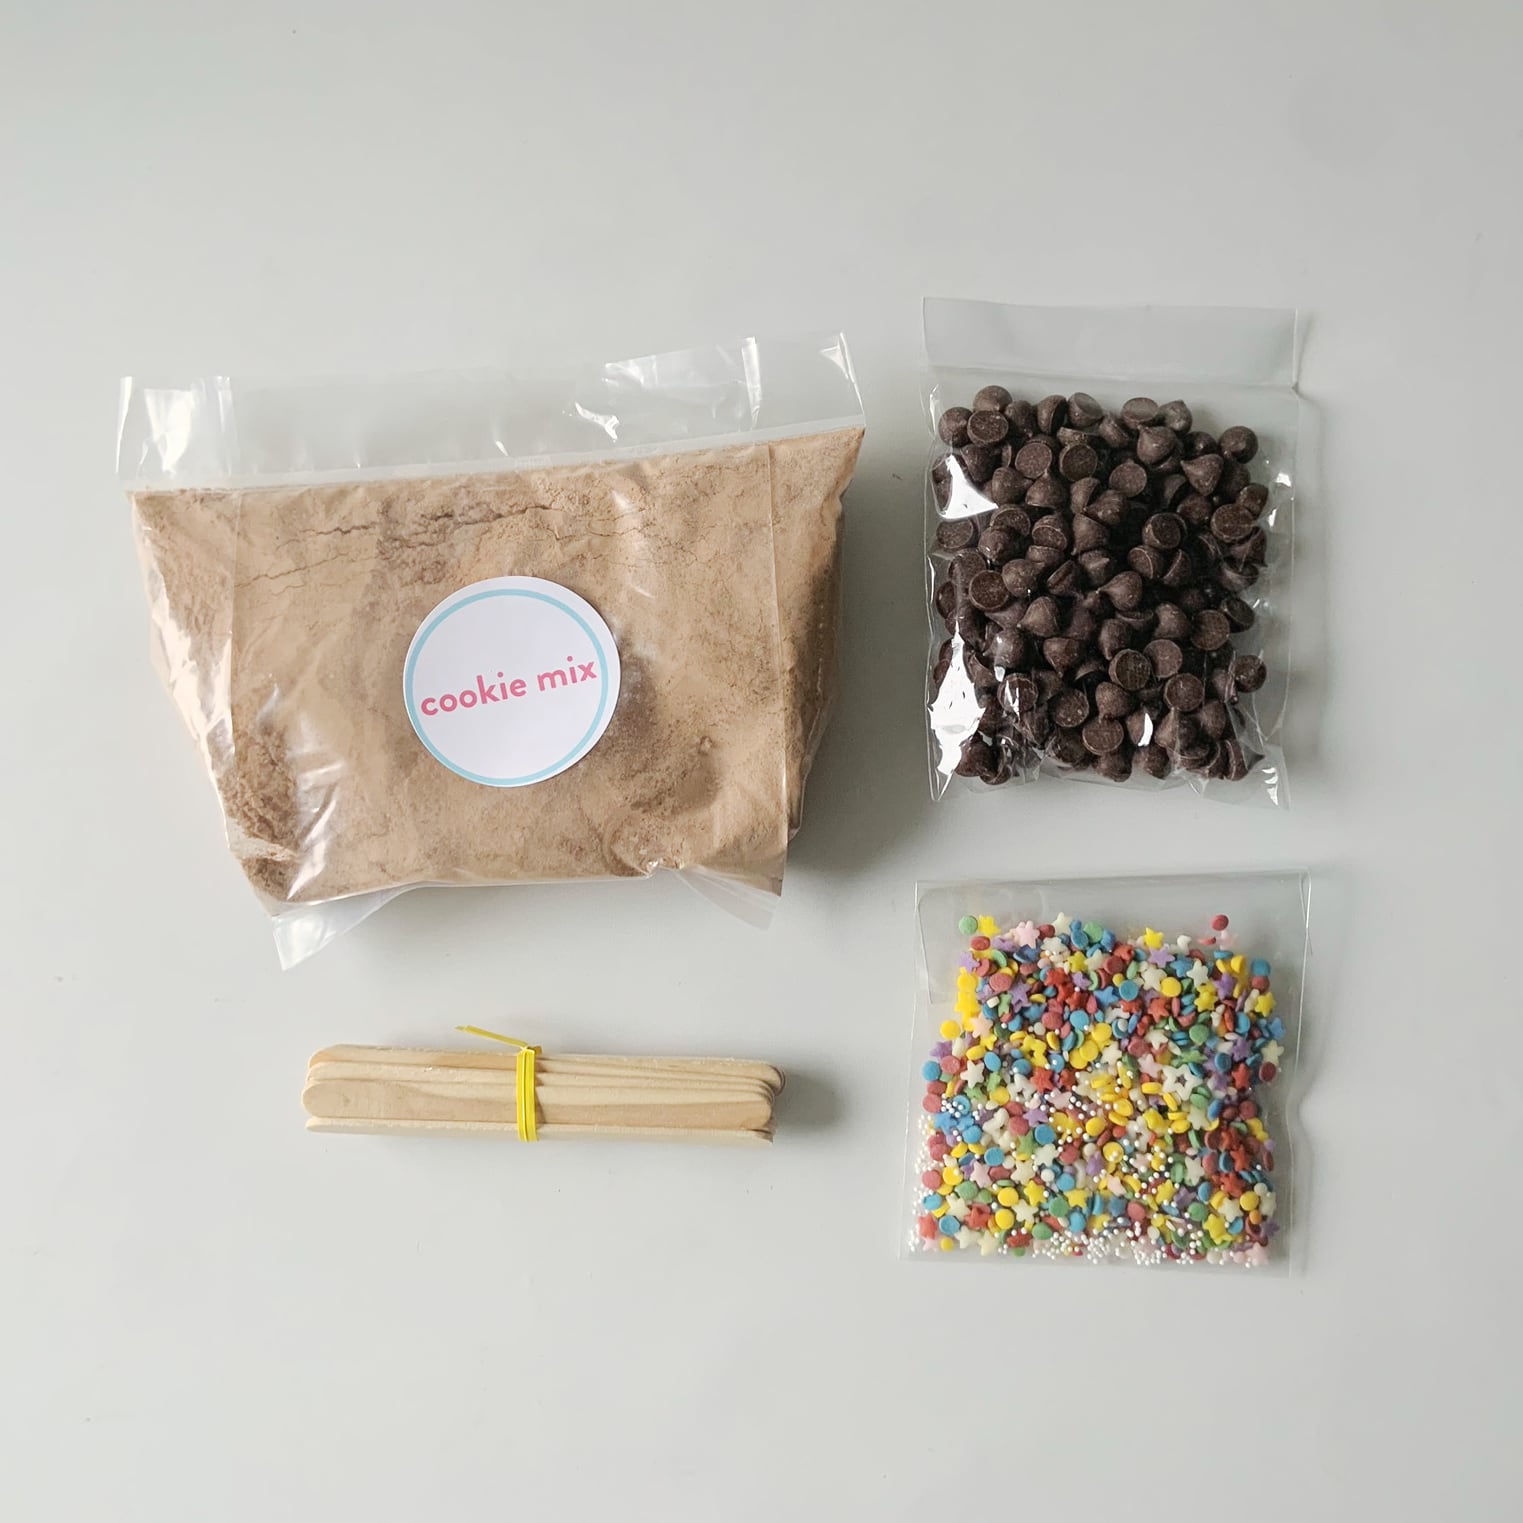 Baking kit supplies for chocolate chip sprinkle cookie pops